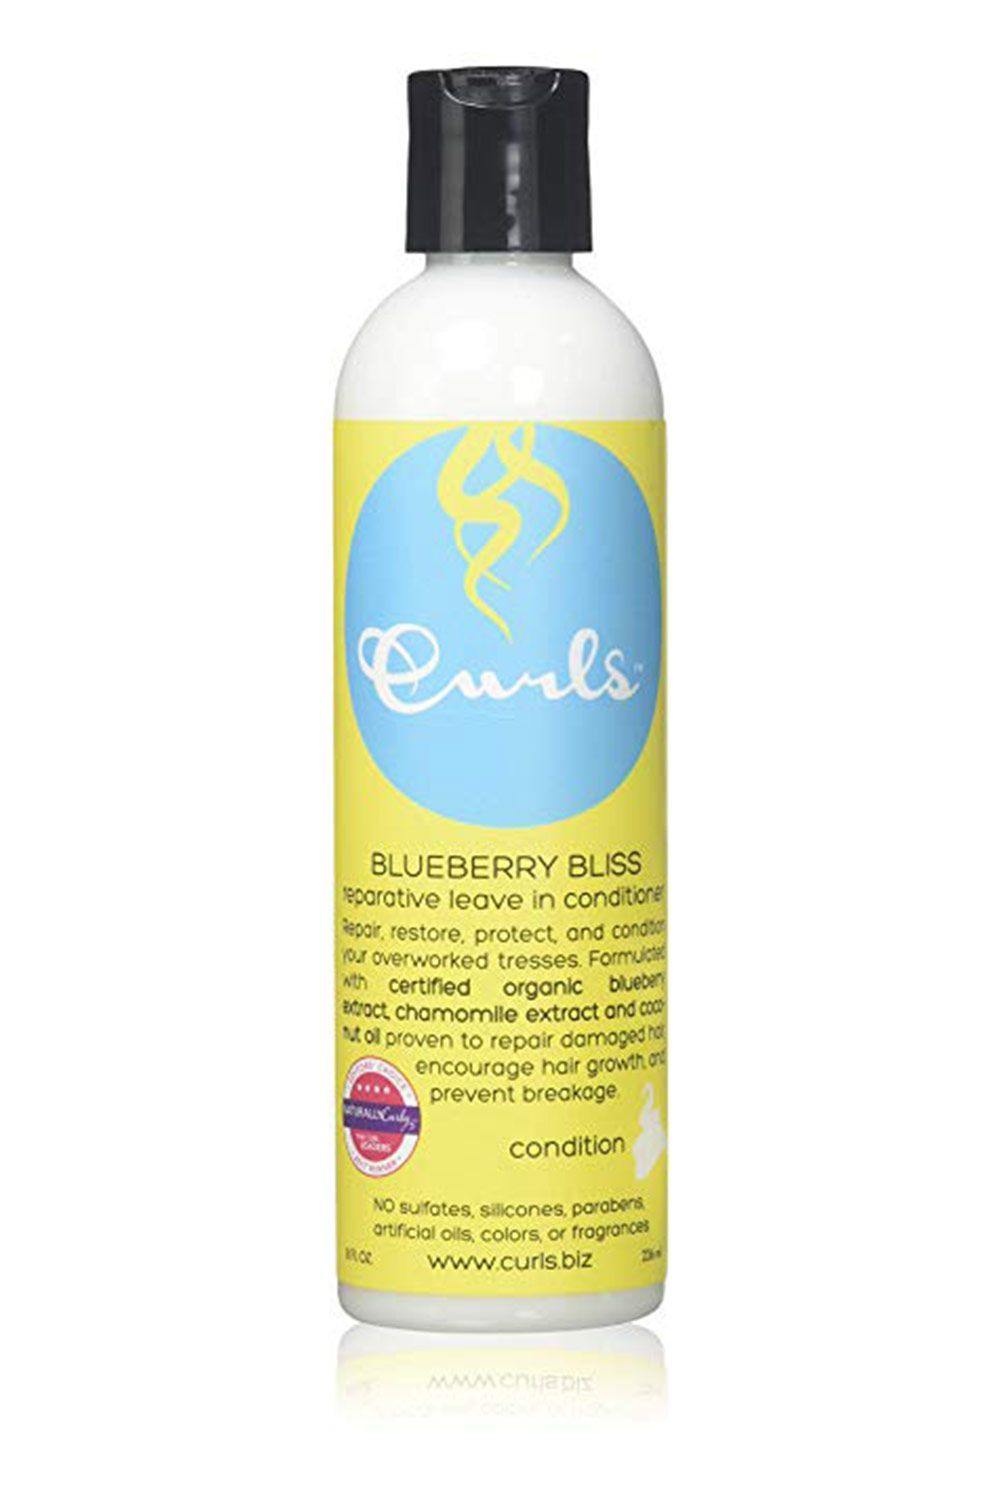 Curls Blueberry Bliss Leave In Conditioner